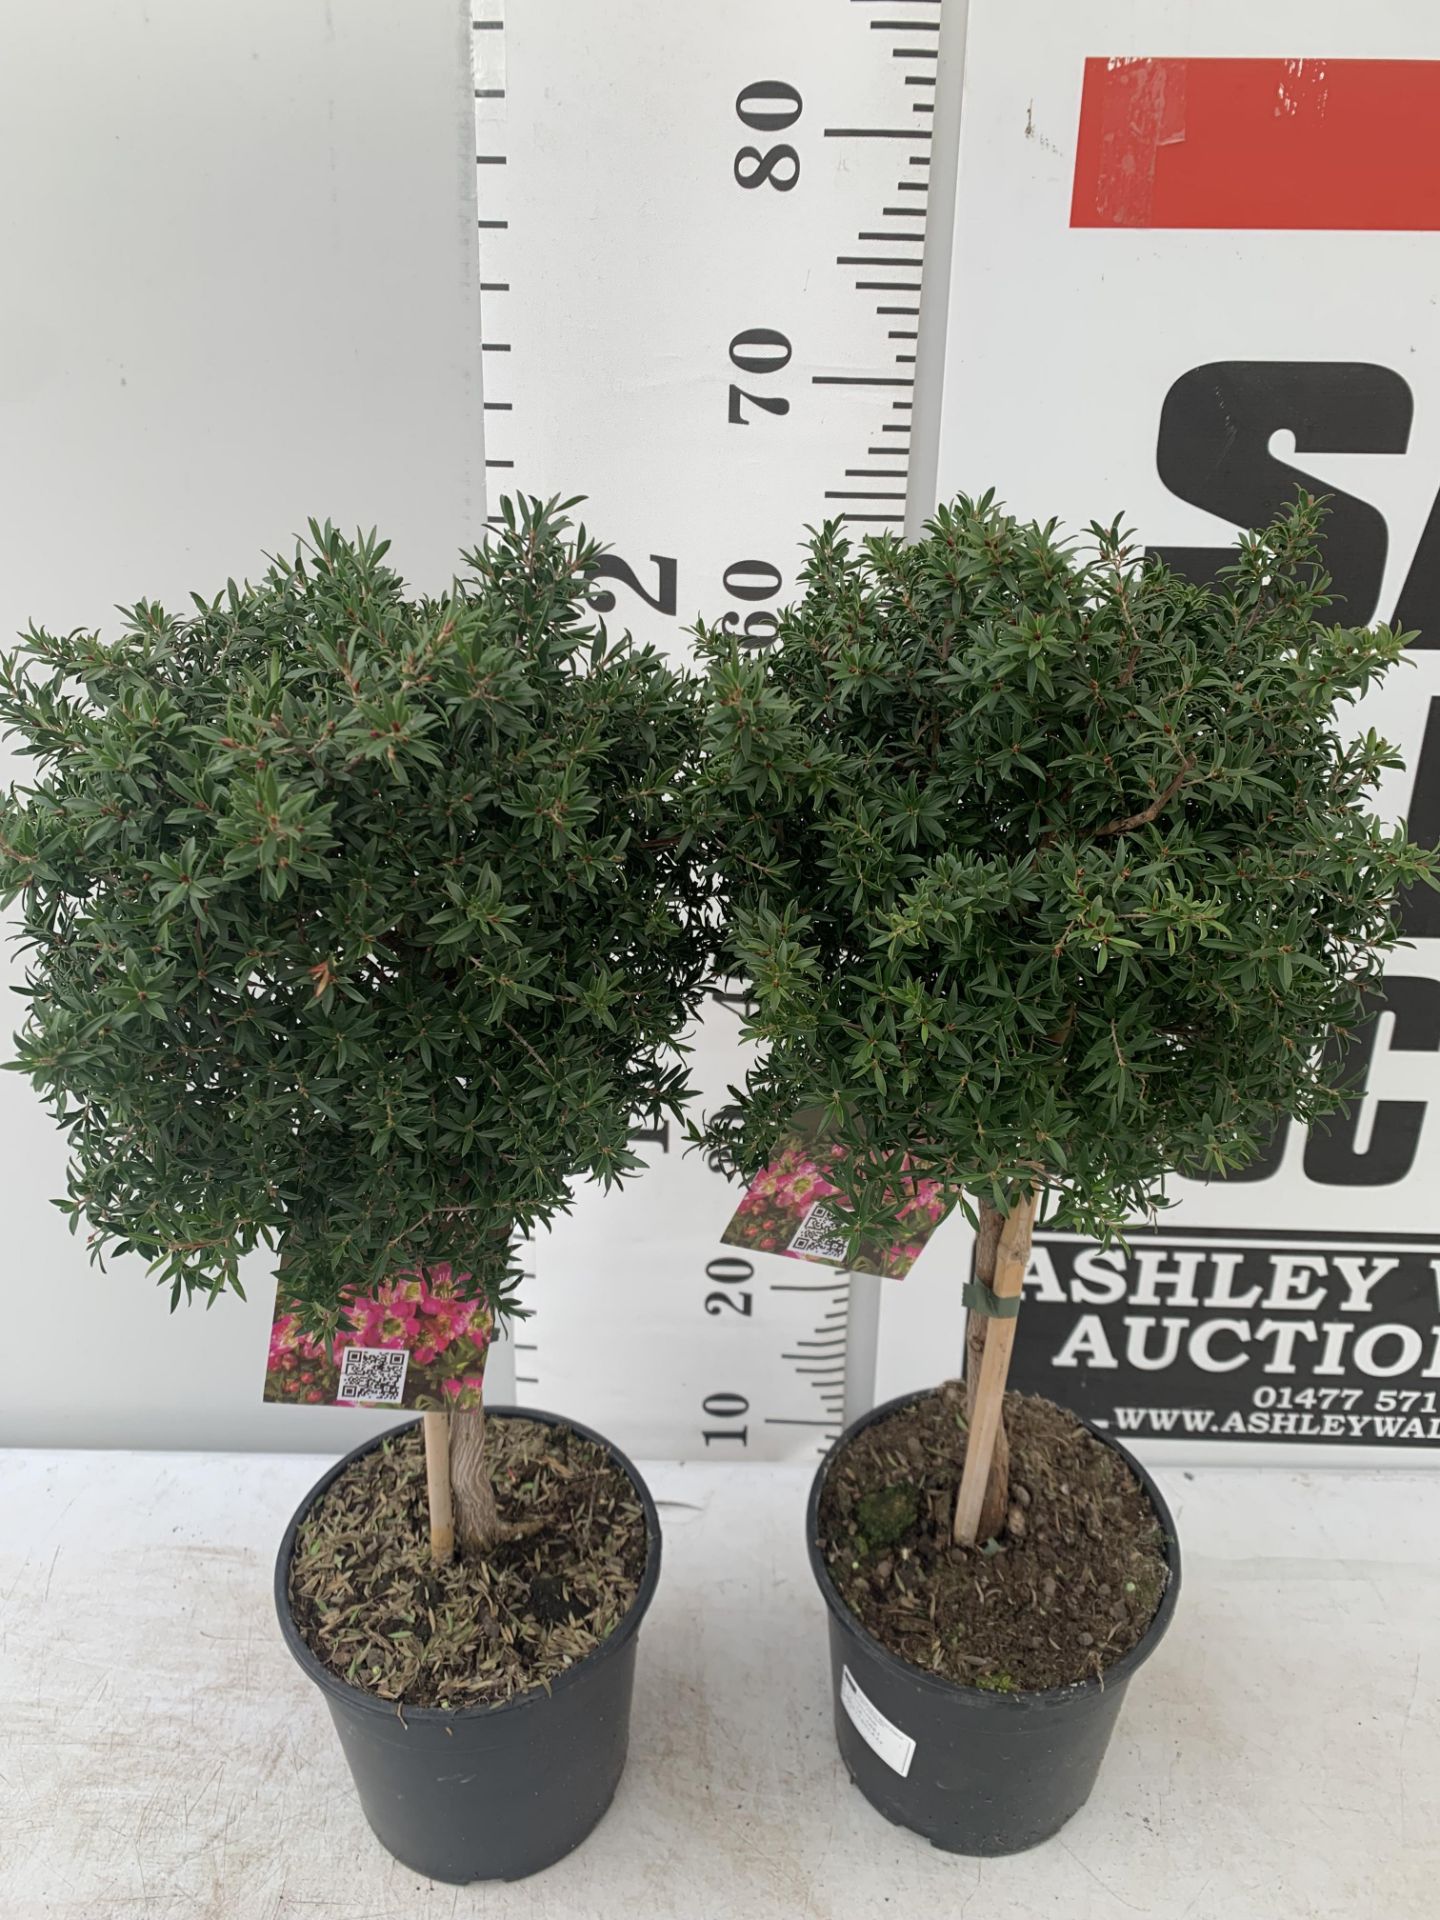 TWO LEPTOSPERMUM 'SUNSHINE' PINK STANDARD TREES APPROX 75CM IN HEIGHT IN FIVE LTR POTS PLUS VAT TO - Image 5 of 10